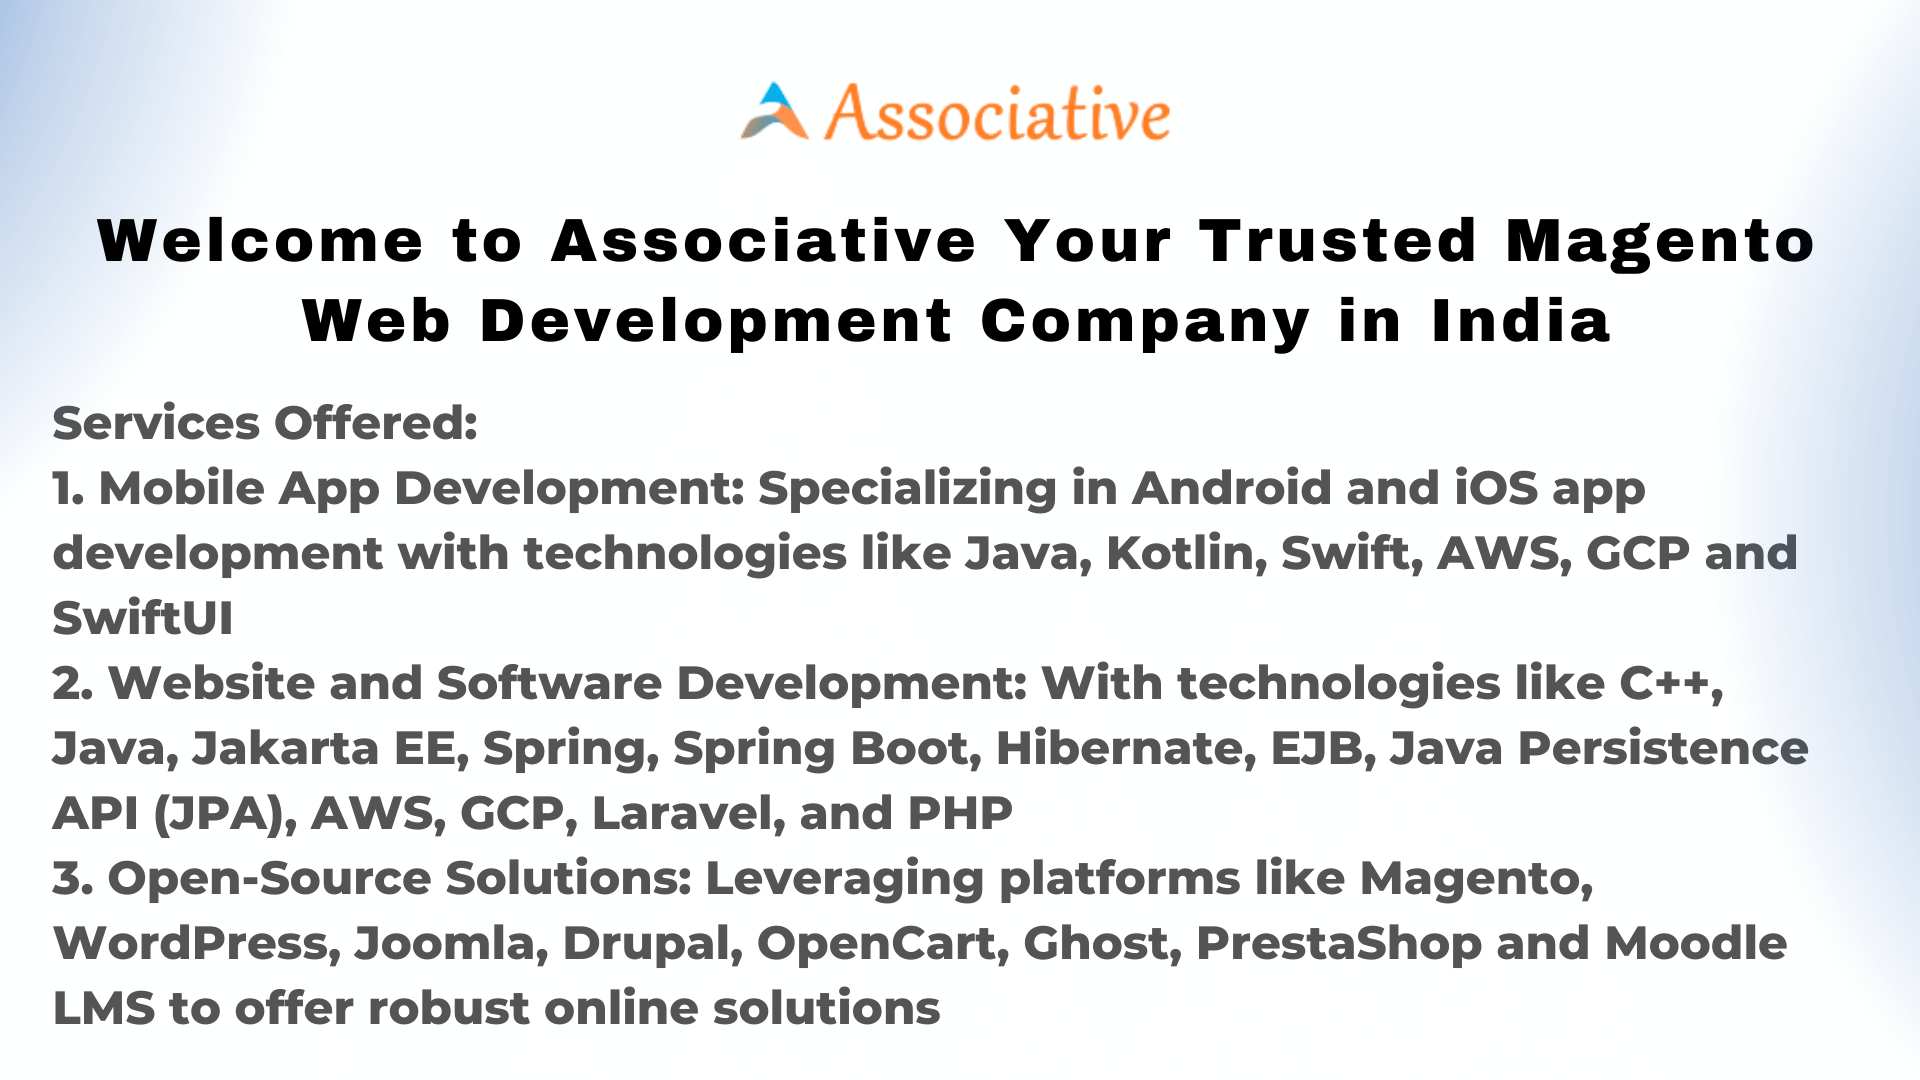 Welcome to Associative Your Trusted Magento Web Development Company in India